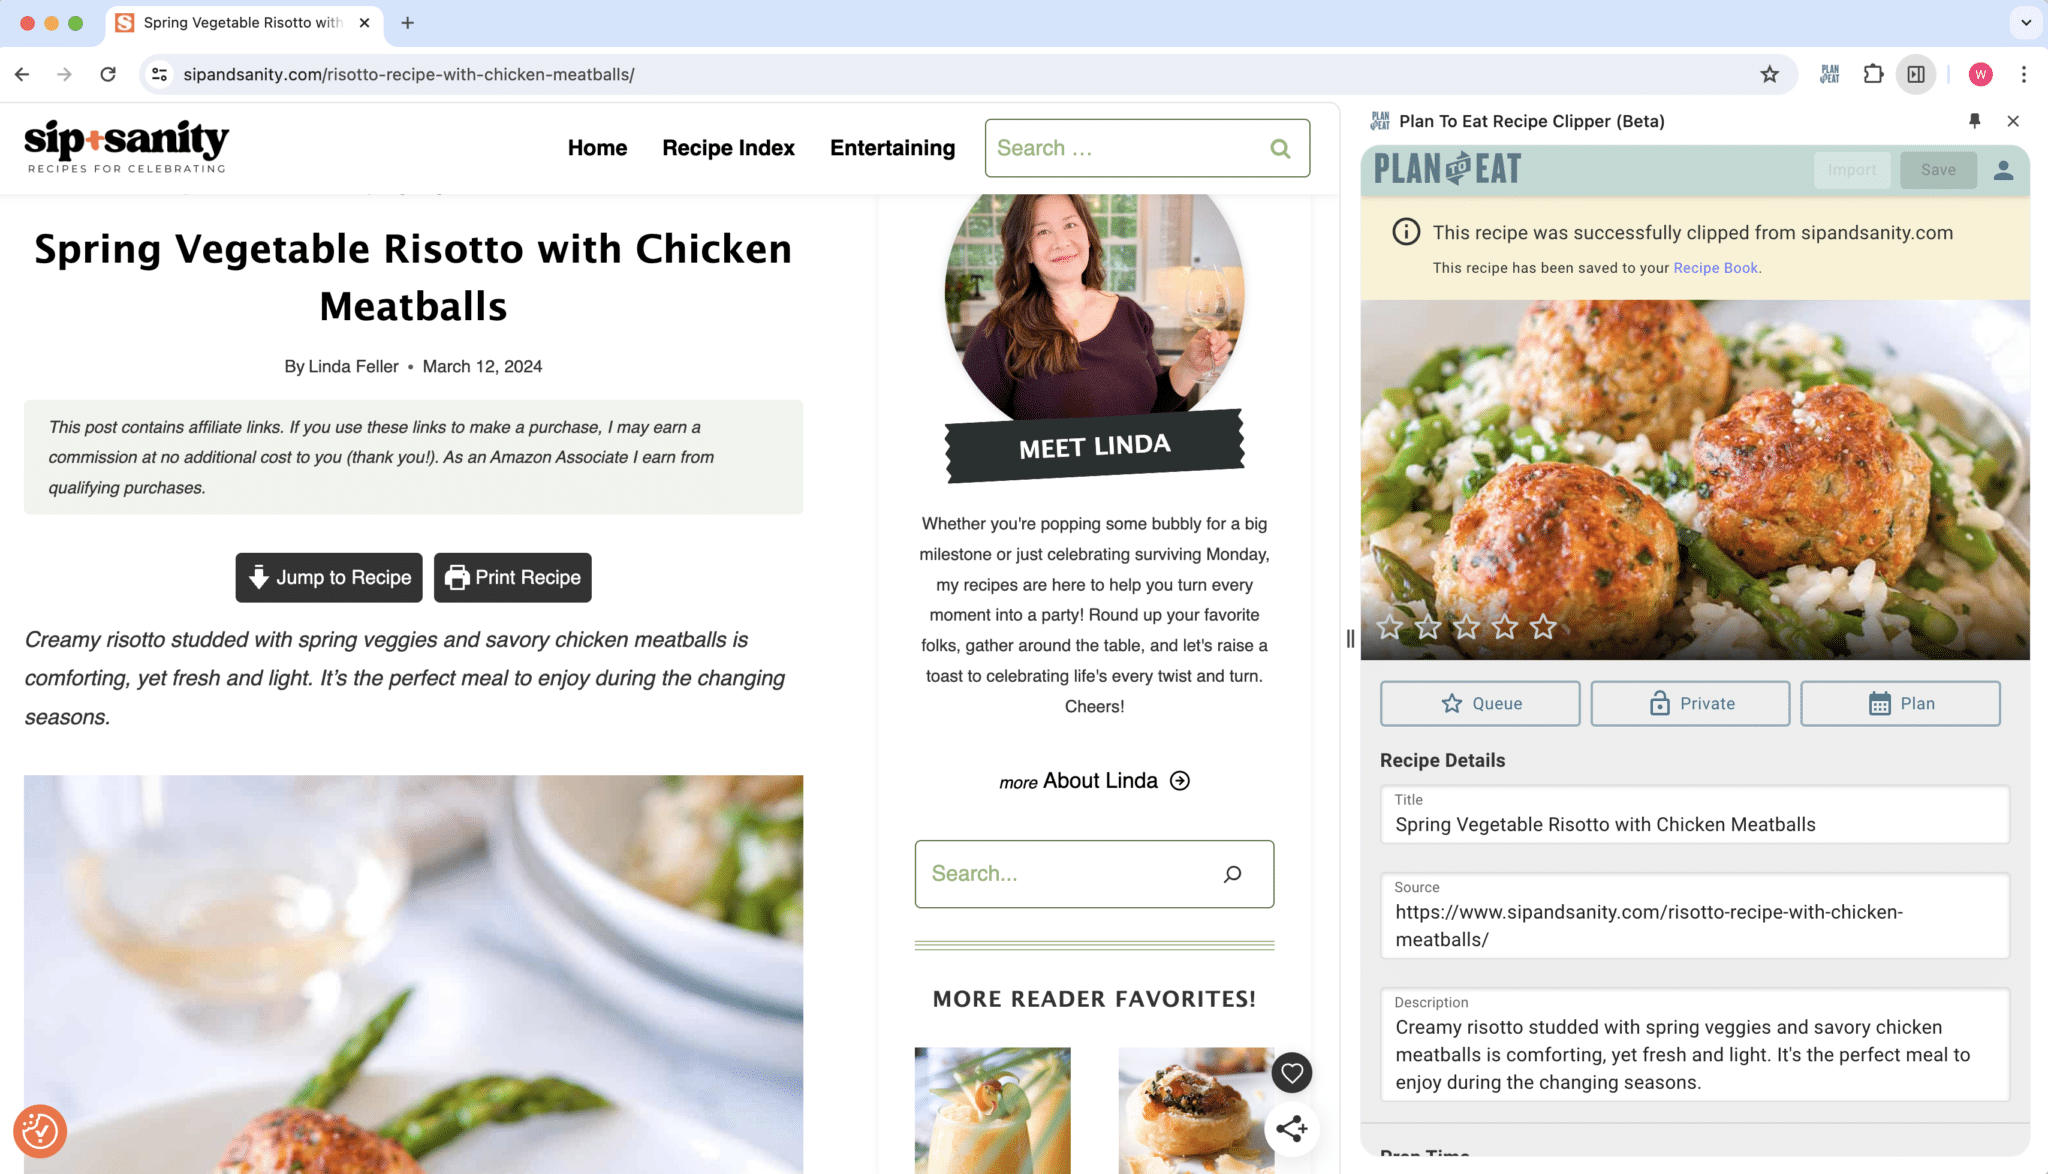 browser extension recipe clipper in use